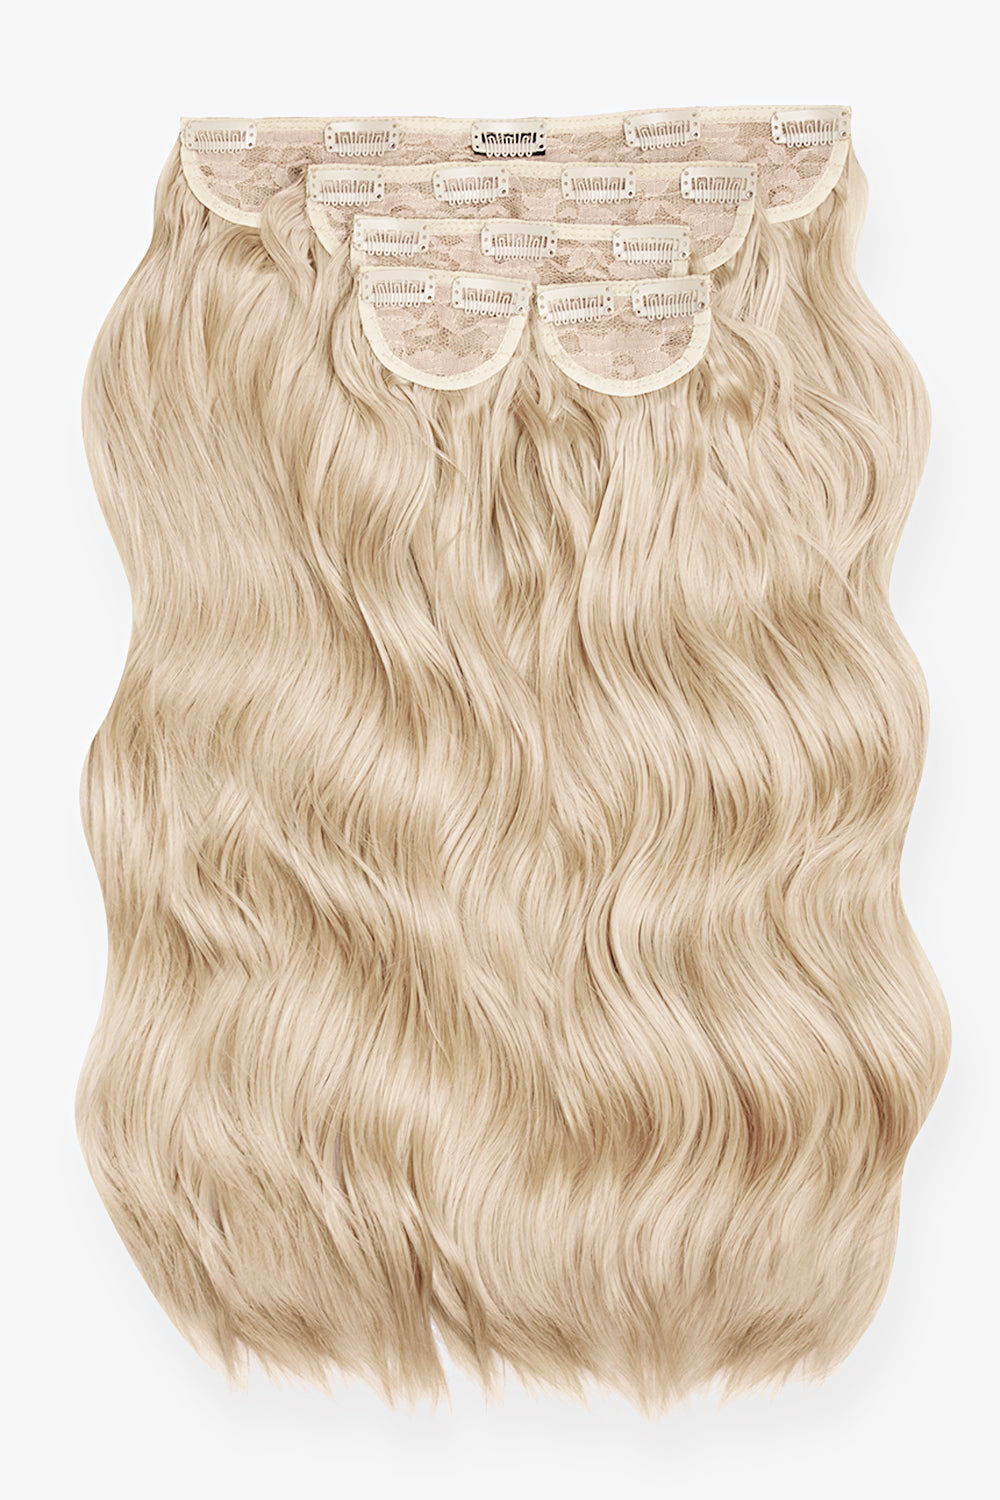 Super Thick 22’’ 5 Piece Brushed Out Wave Clip In Hair Extensions - Light Golden Blonde